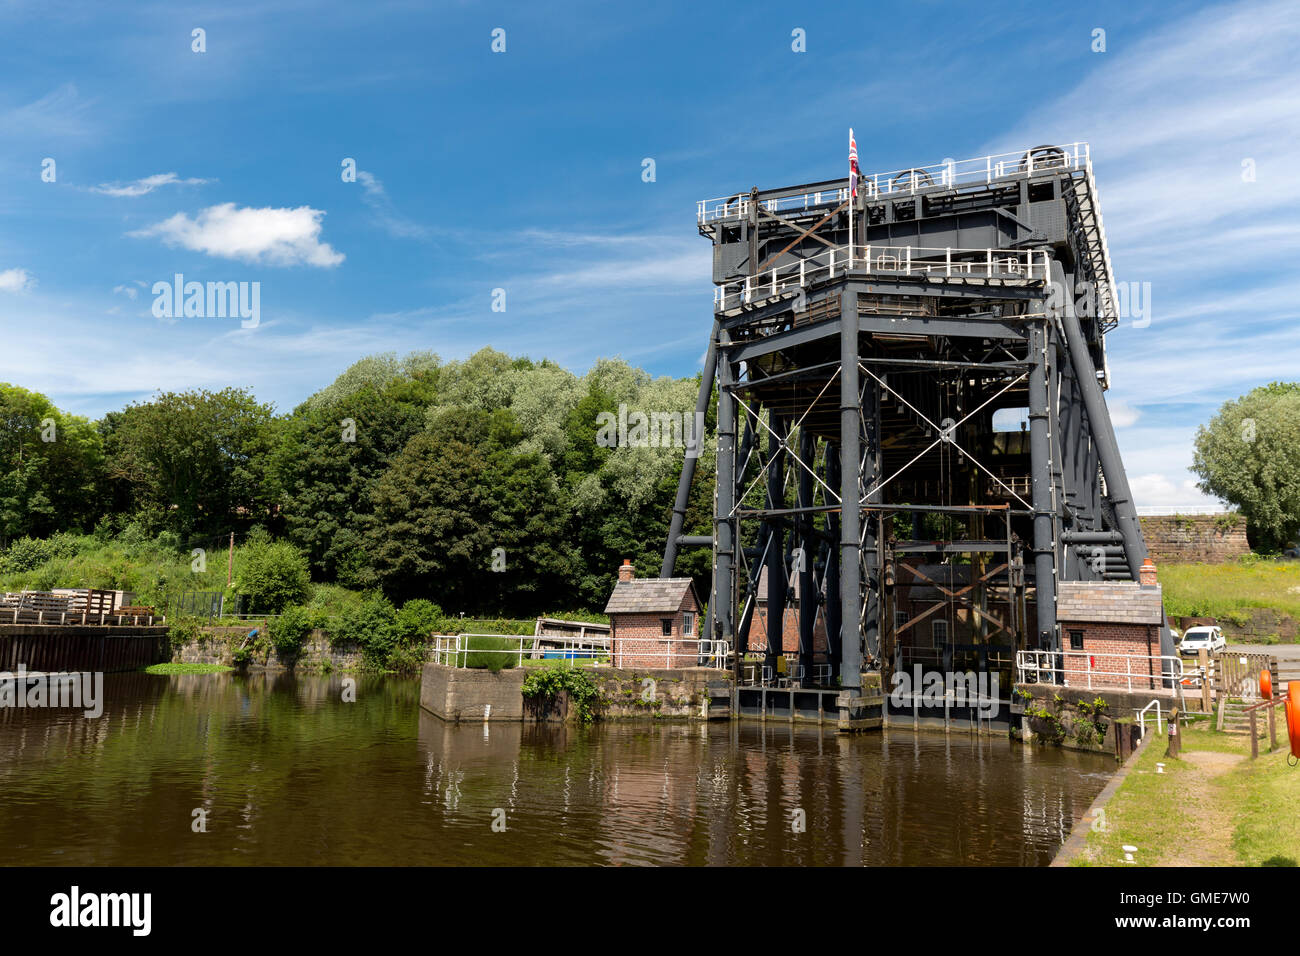 Canals in England    Anderton Boat Lift  River Weaver Navigation England UK Stock Photo